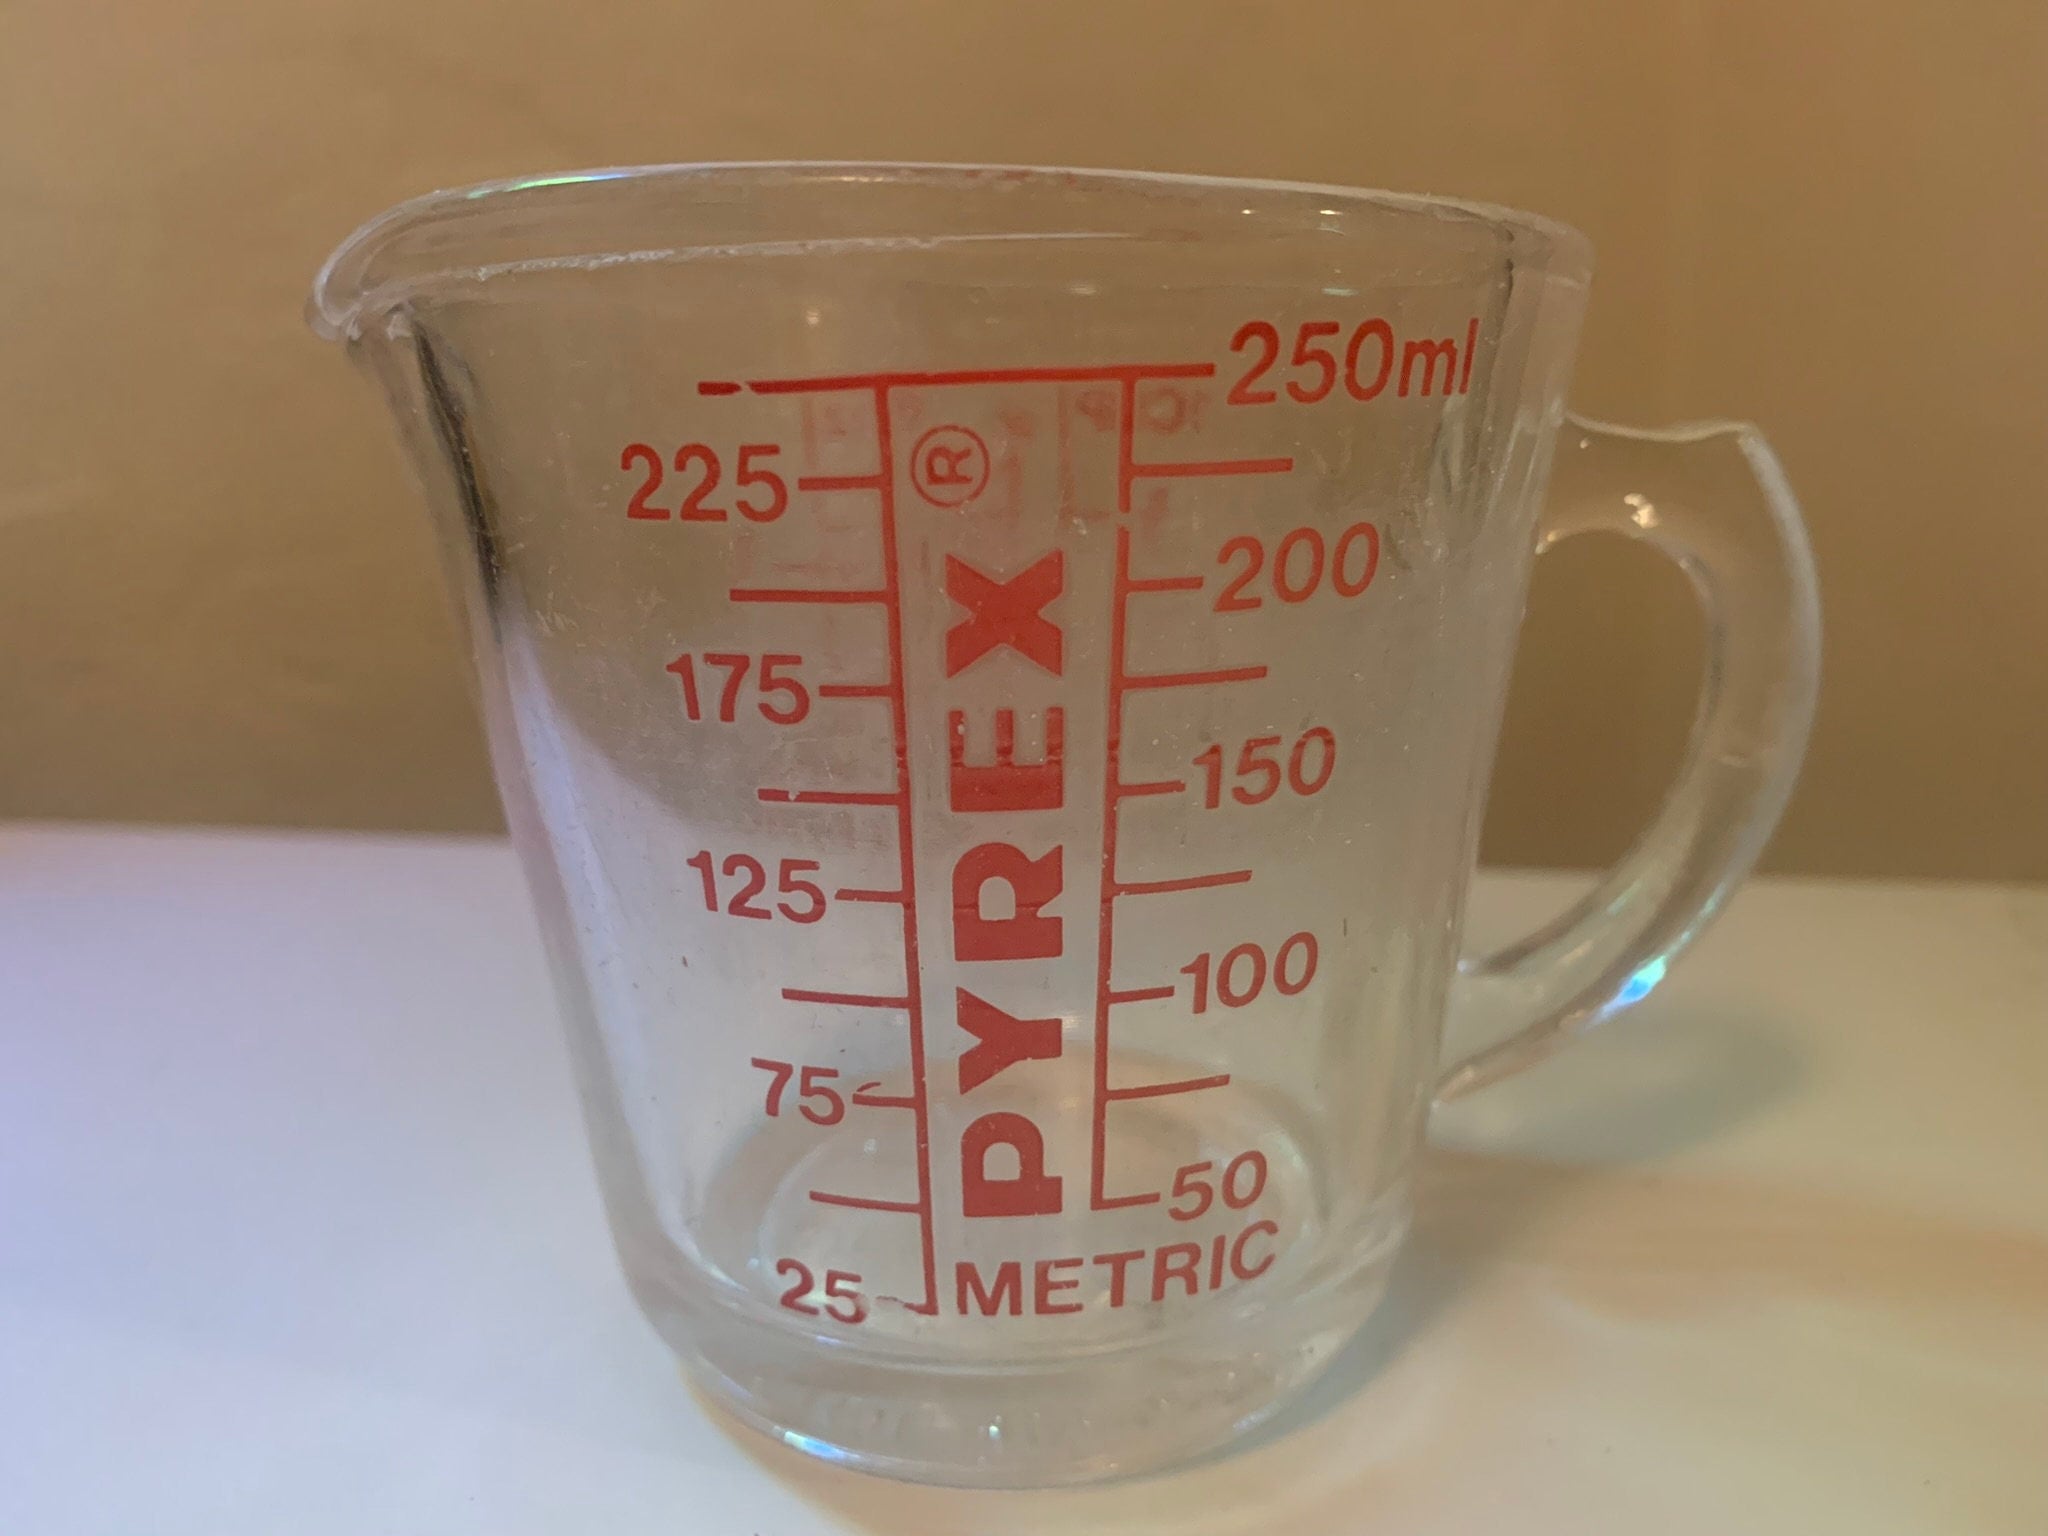 Vintage Pyrex measuring cup 2 cup liquid measure cup – Ma and Pa's